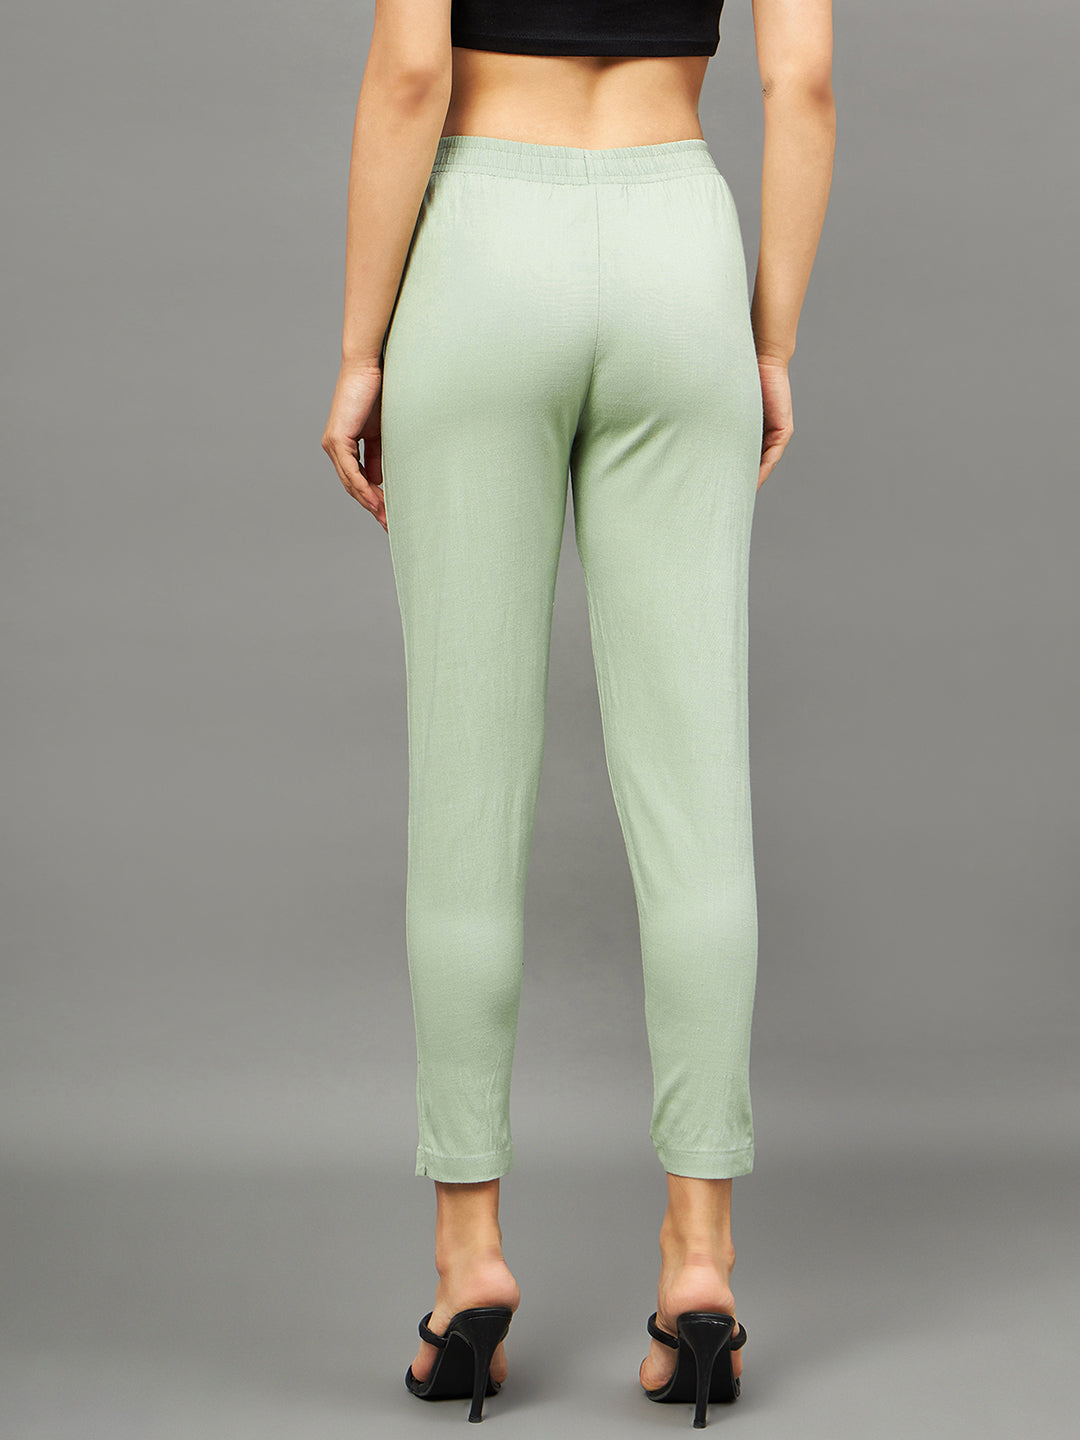 How to wear a light green pant! Mint jeans | Green pants outfit, Business  casual outfits for work, Modest summer outfits